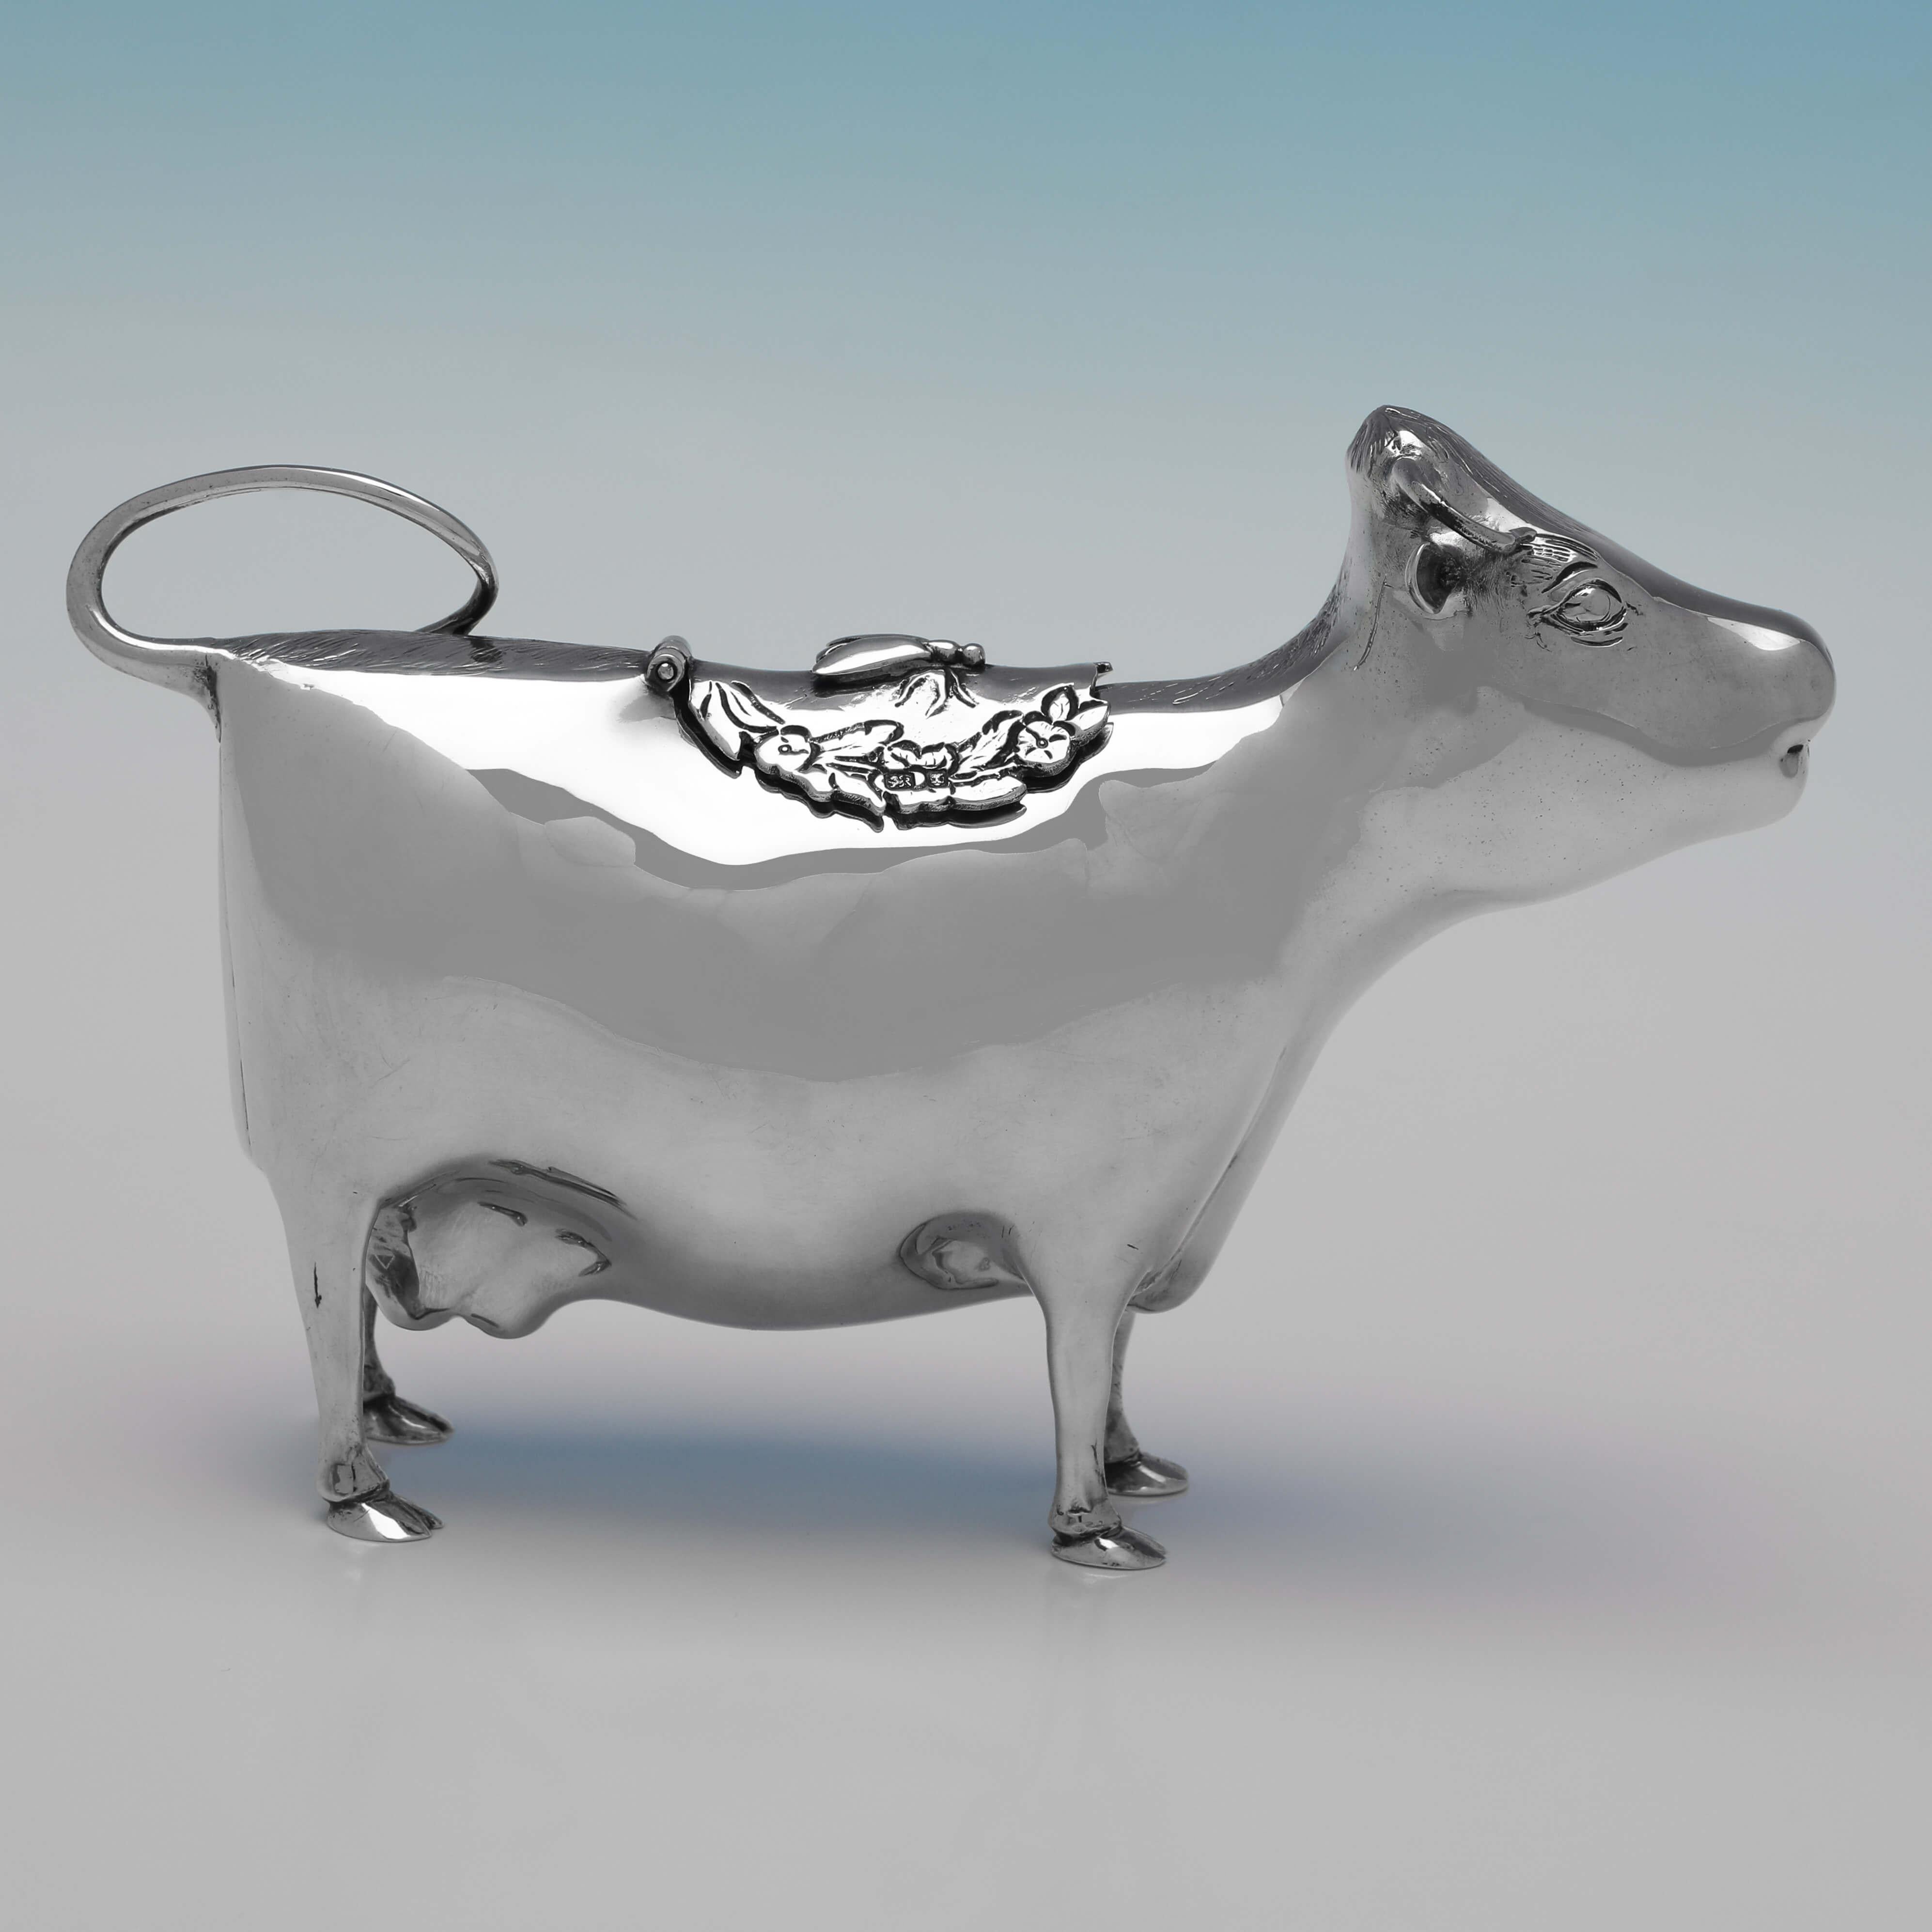 Hallmarked in London in 1977 by Richard Comyns, this handsome, Sterling Silver Cow Creamer, is a charming example. 

The cow creamer measures 4